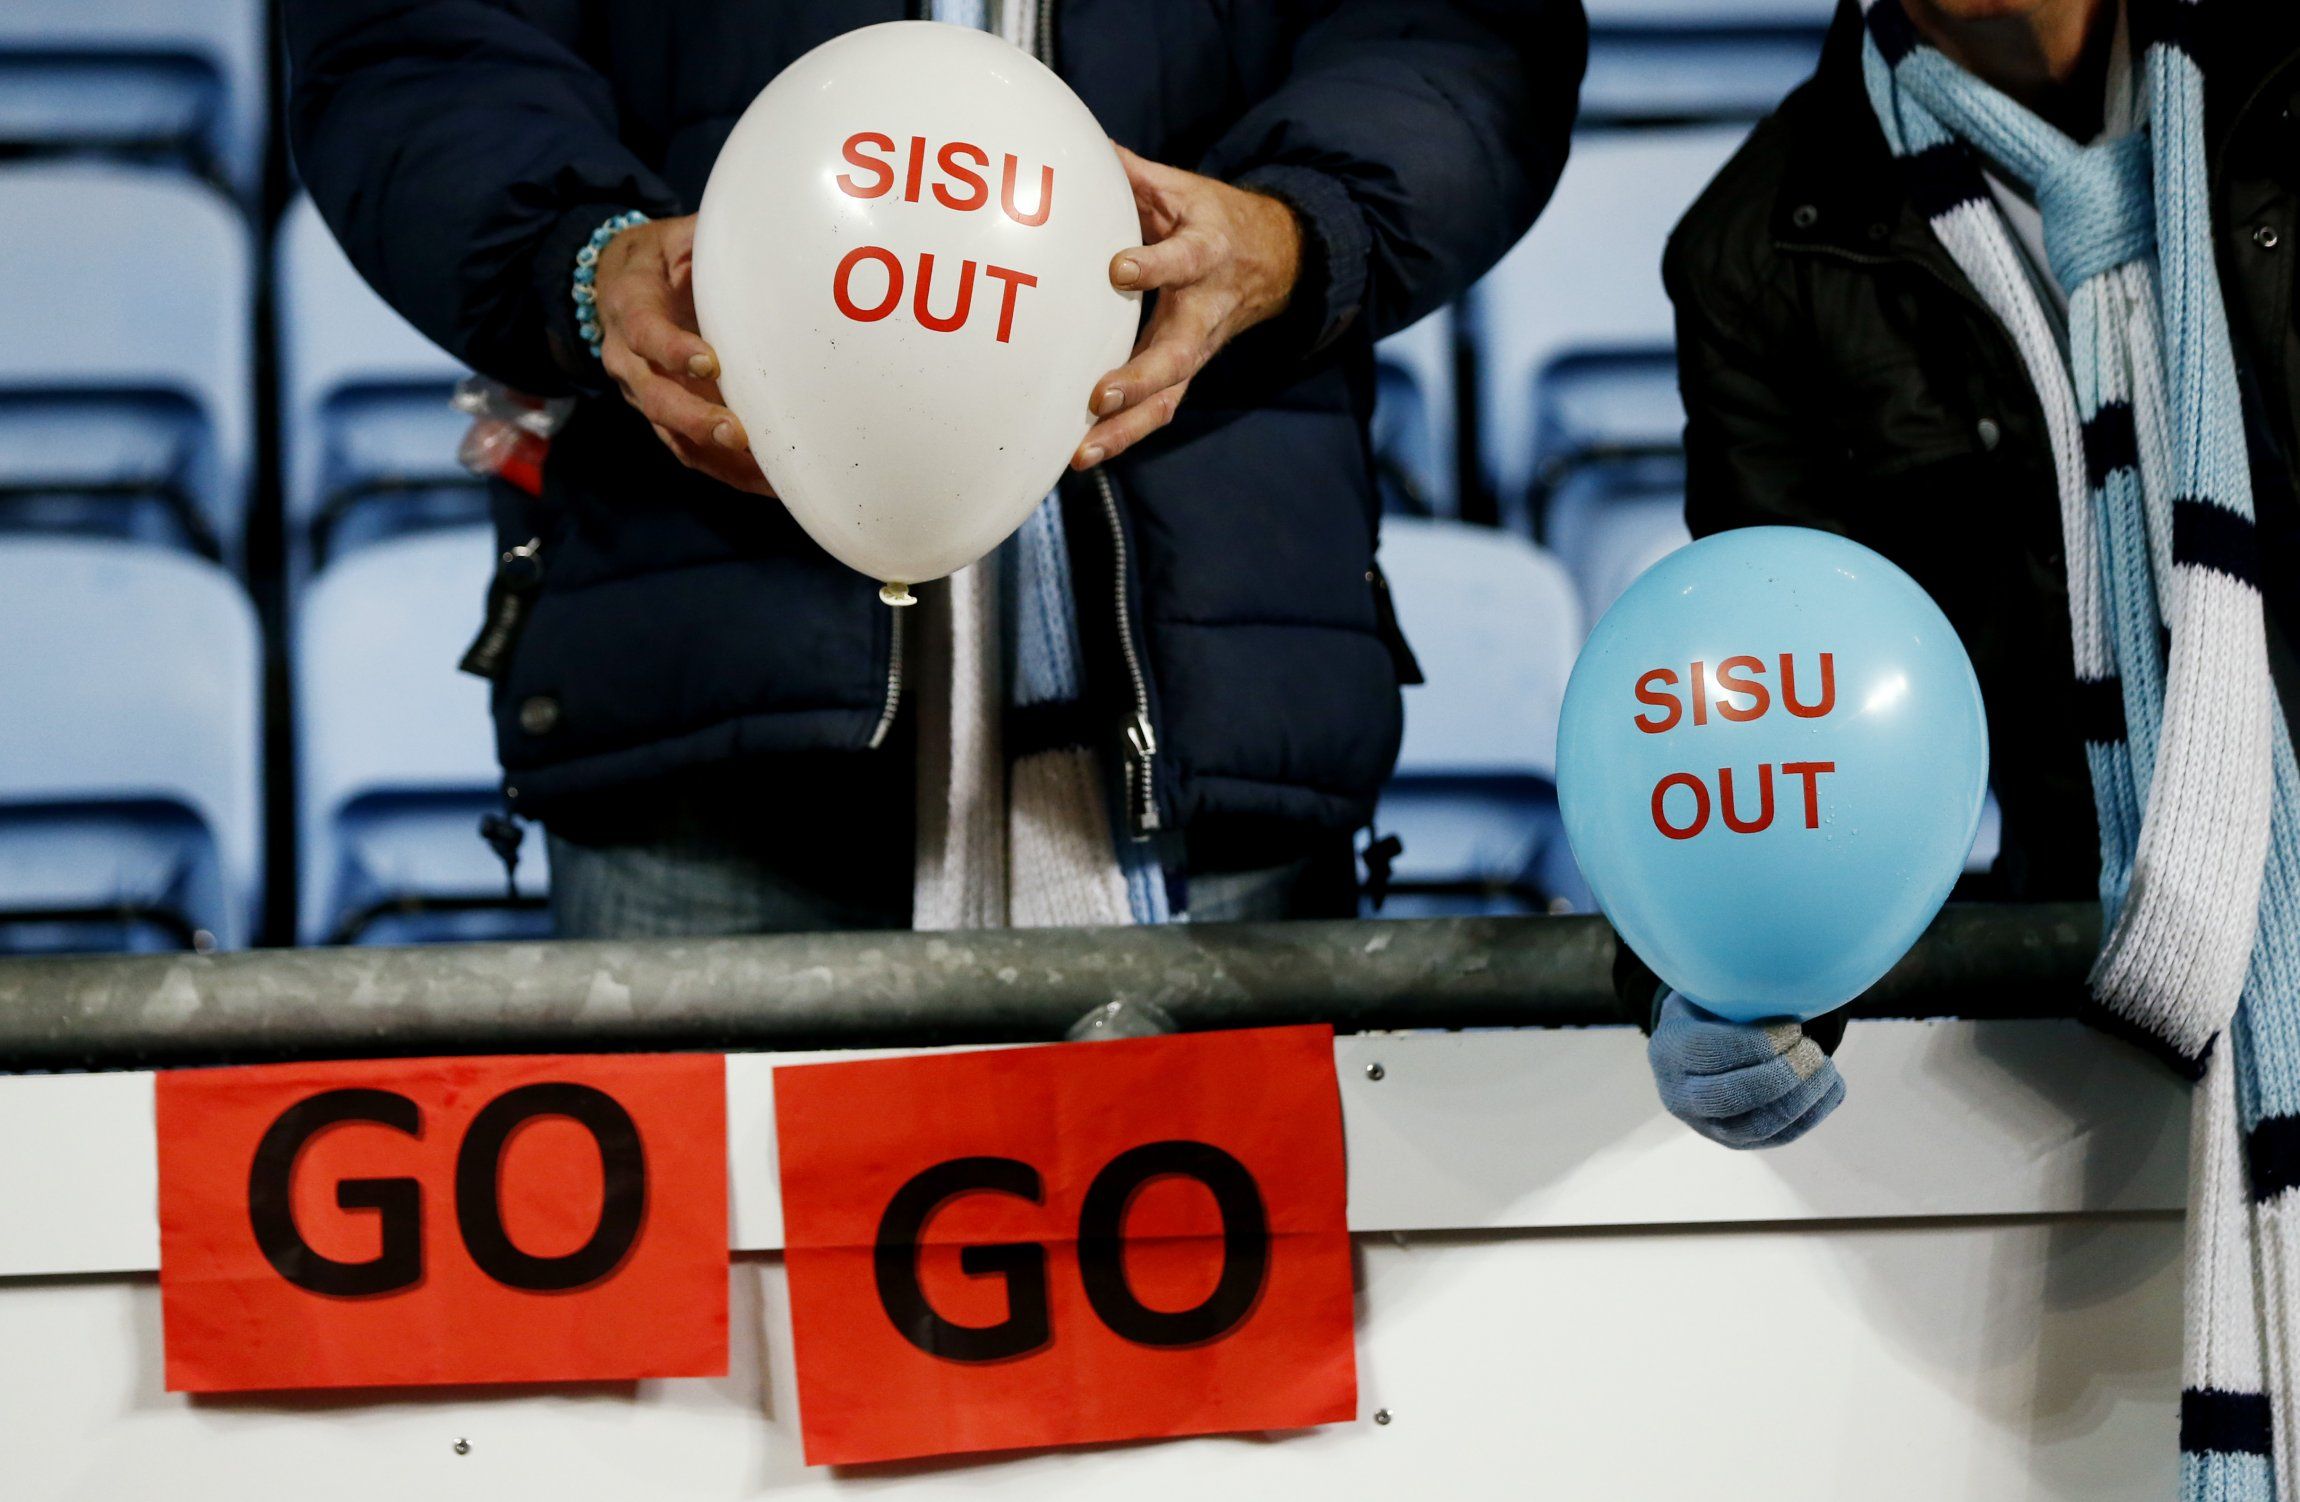 SISU out Coventry signs